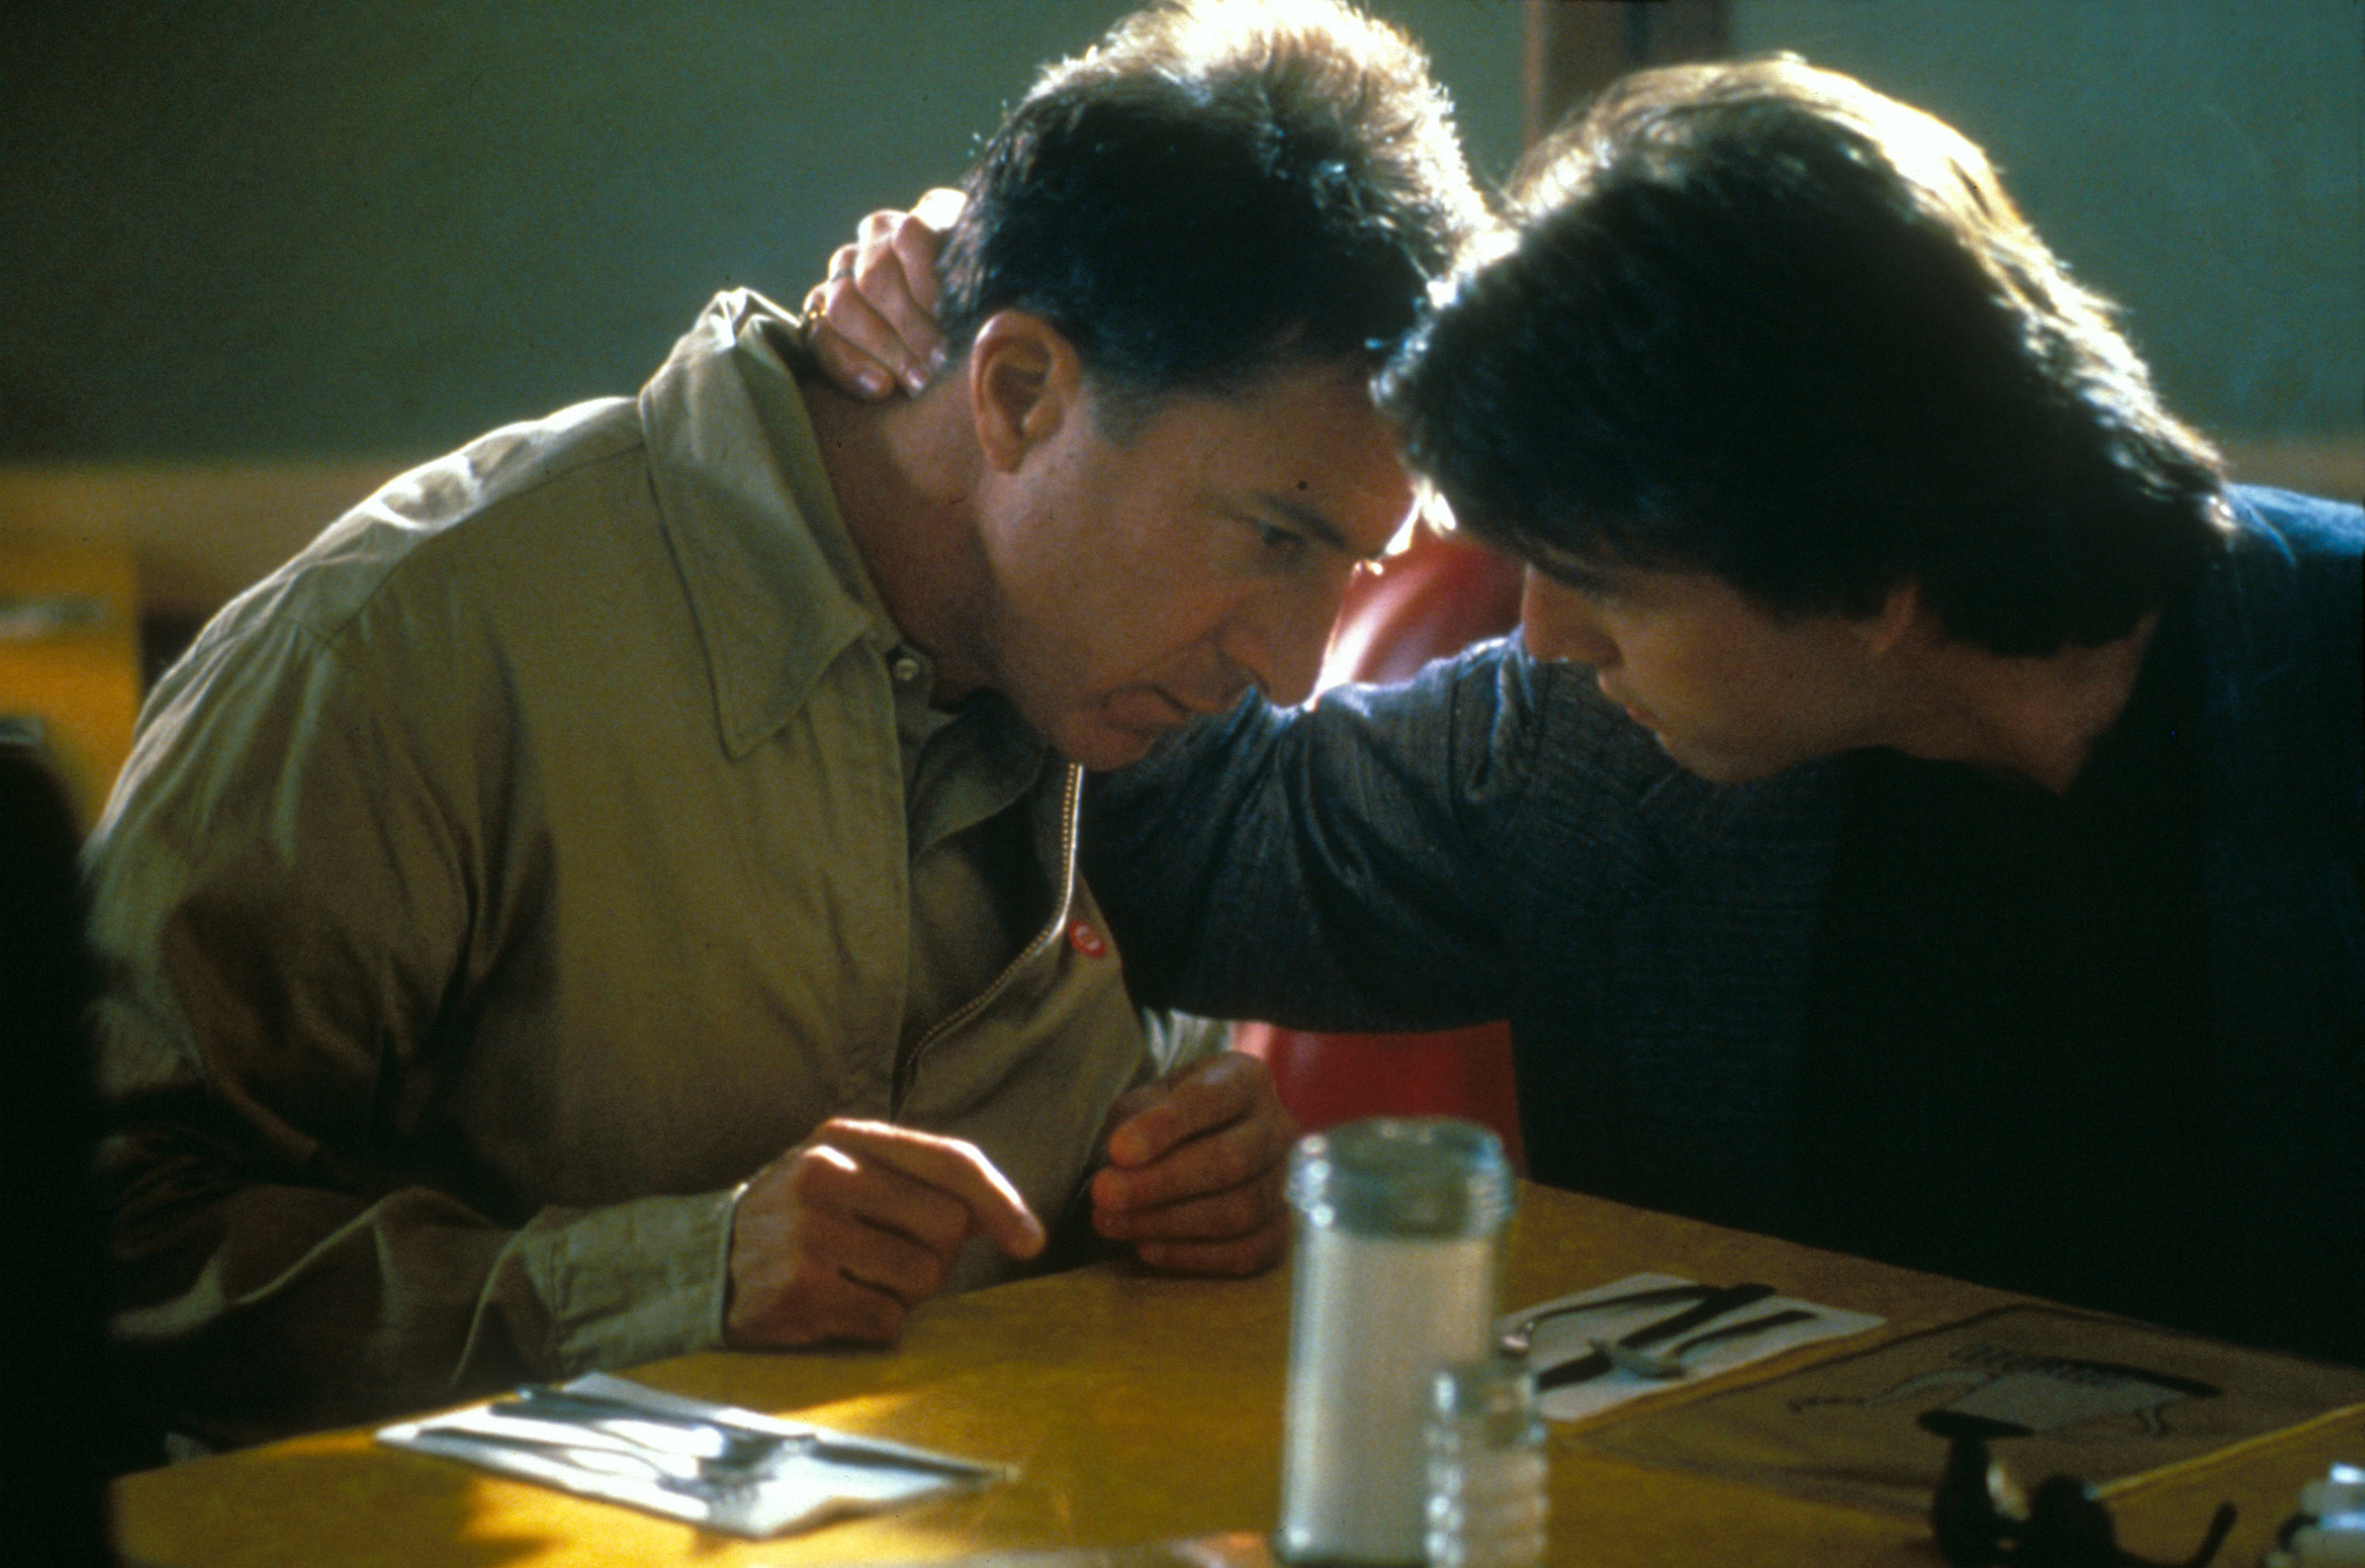 <p>Not every aspect of <em>Rain Ma</em>n is based on real events, but the main character, Raymond, played by Dustin Hoffman, is based on a real person, Kim Peek, who had savant syndrome. The film grossed hundreds of millions of dollars, and it’s still widely considered an essential film for cinephiles to watch. </p><p>You may also like: <a href='https://www.yardbarker.com/entertainment/articles/20_fictional_homes_weve_all_dreamed_of_living_in/s1__40236270'>20 fictional homes we've all dreamed of living in</a></p>